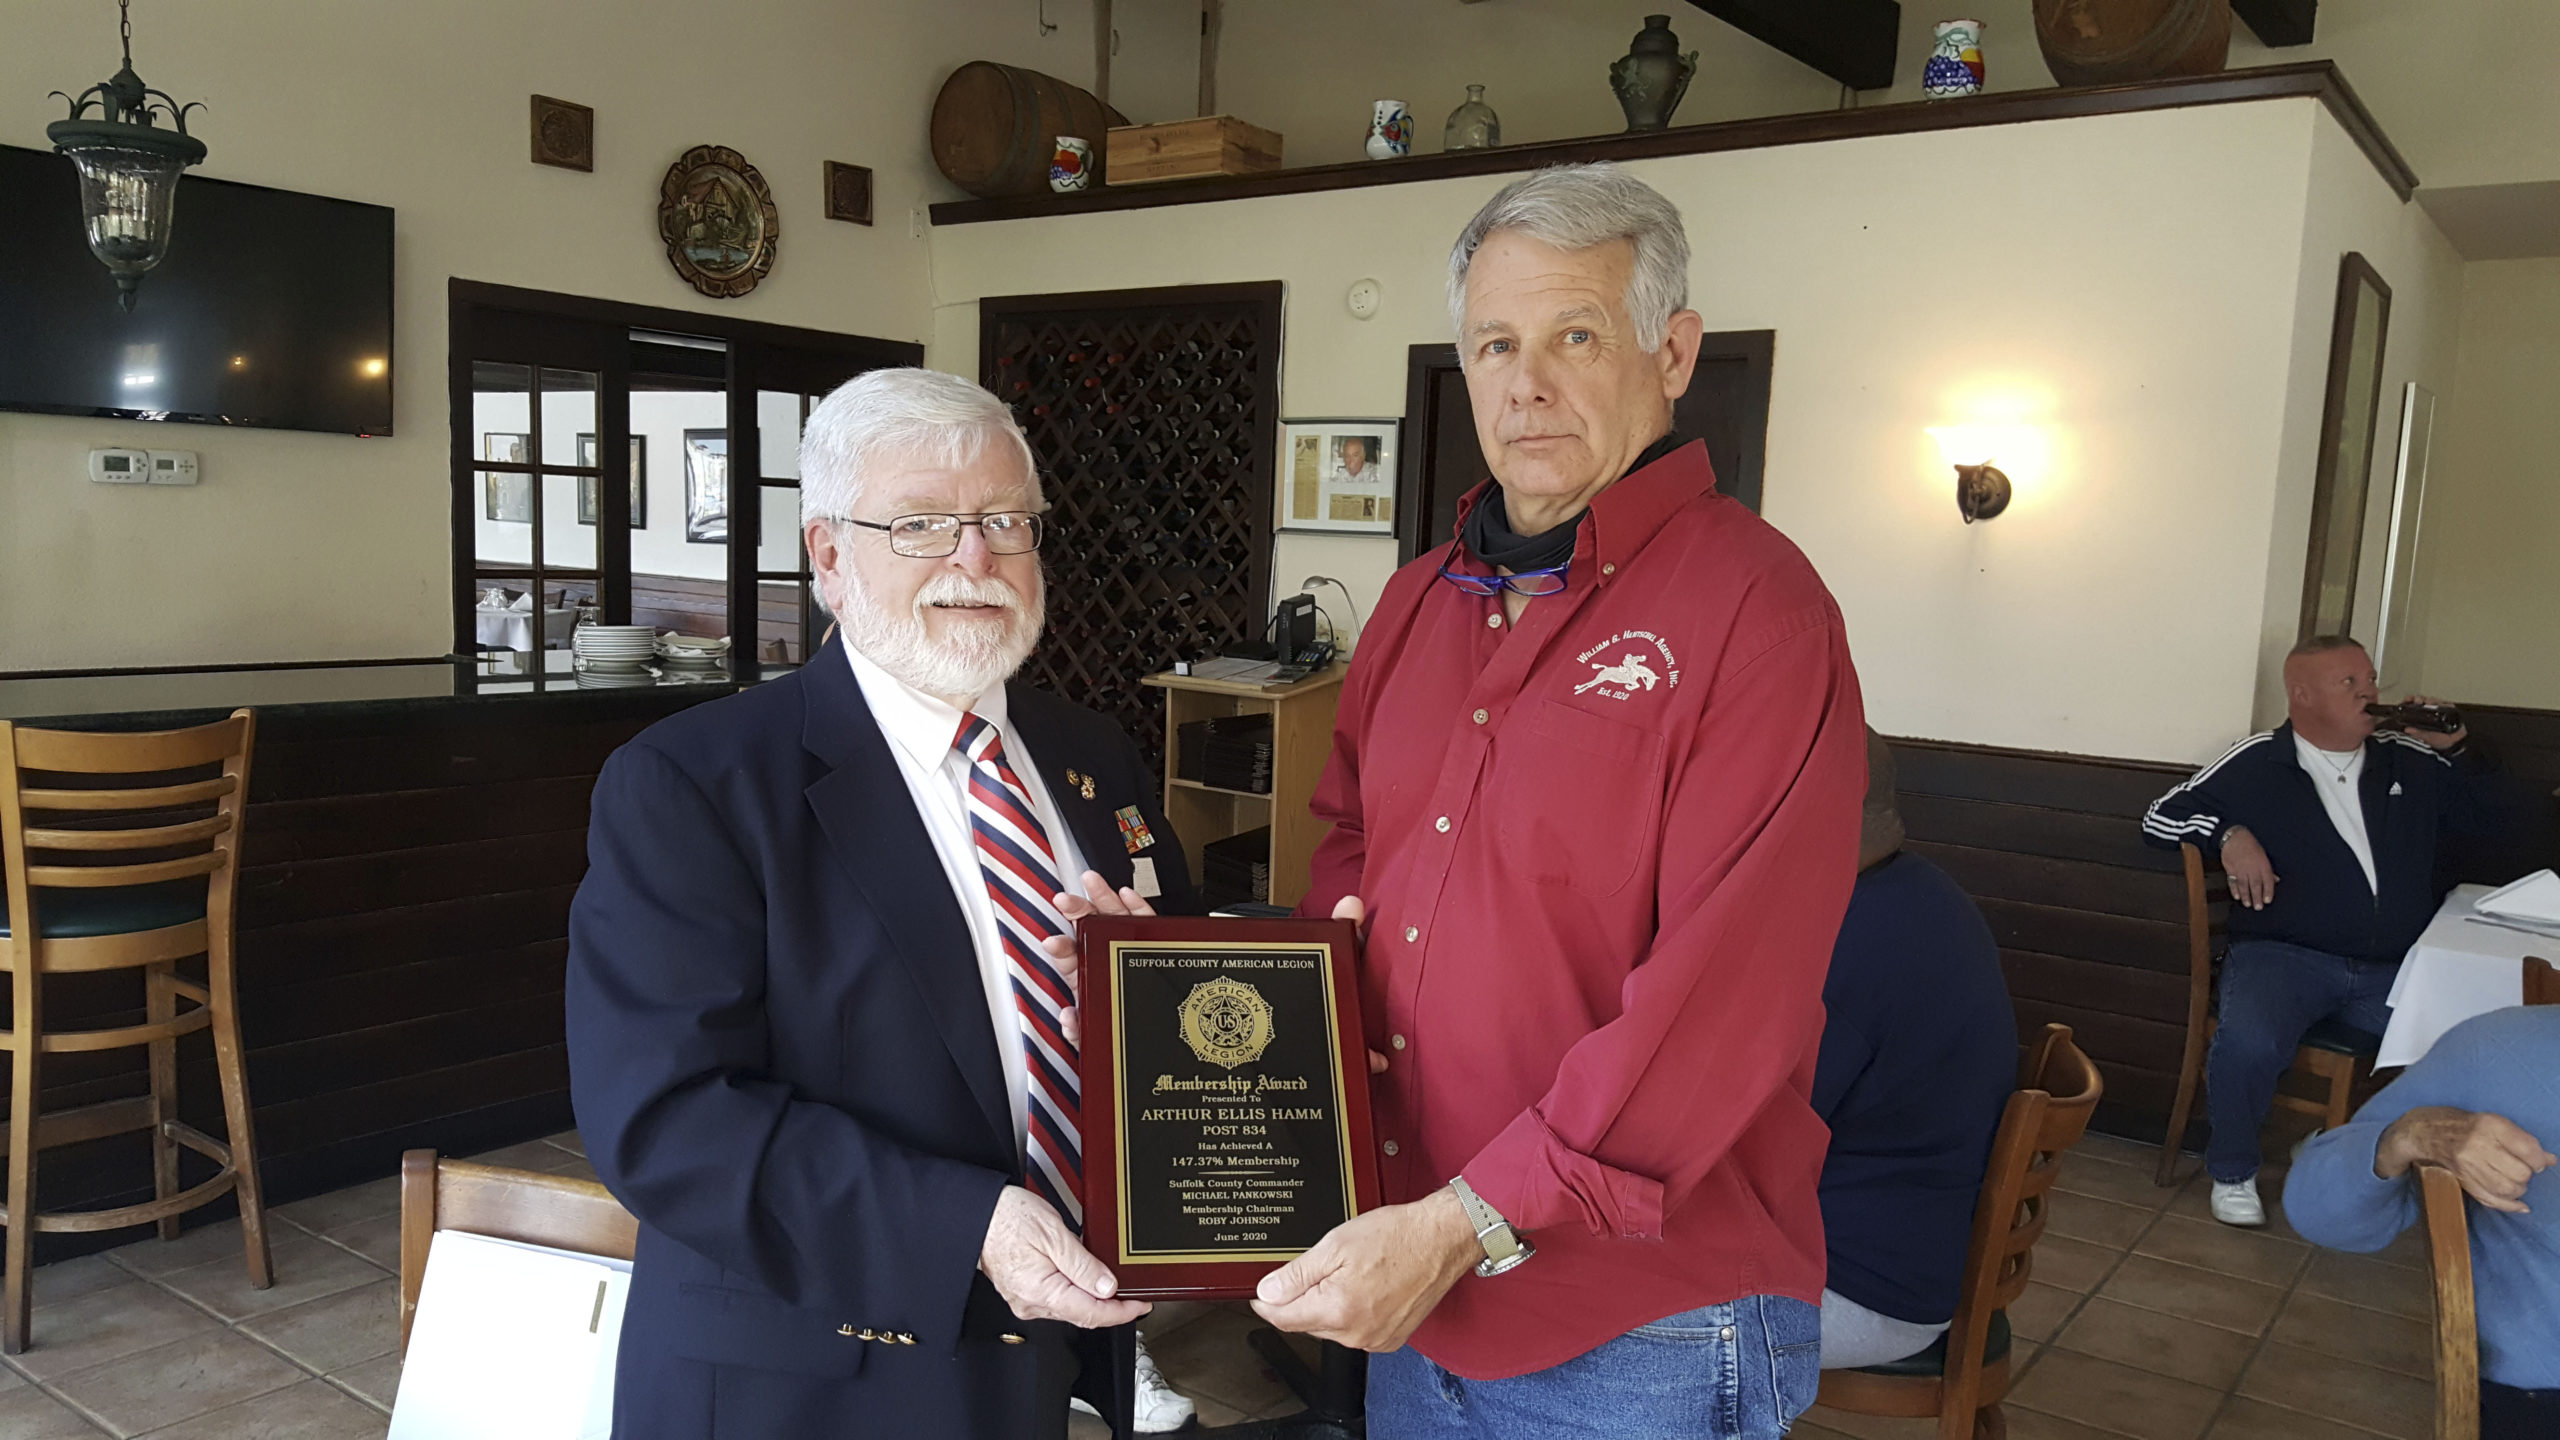 Membership Chair Fred Bauer of the American Legion Arthur Ellis Hamm Post 834 in Westhampton recently accepted a plaque of acknowledgement of a 20% increase in membership  from Rob Robesch, current judge advocate for the 10th district and past Nassau County Commander.